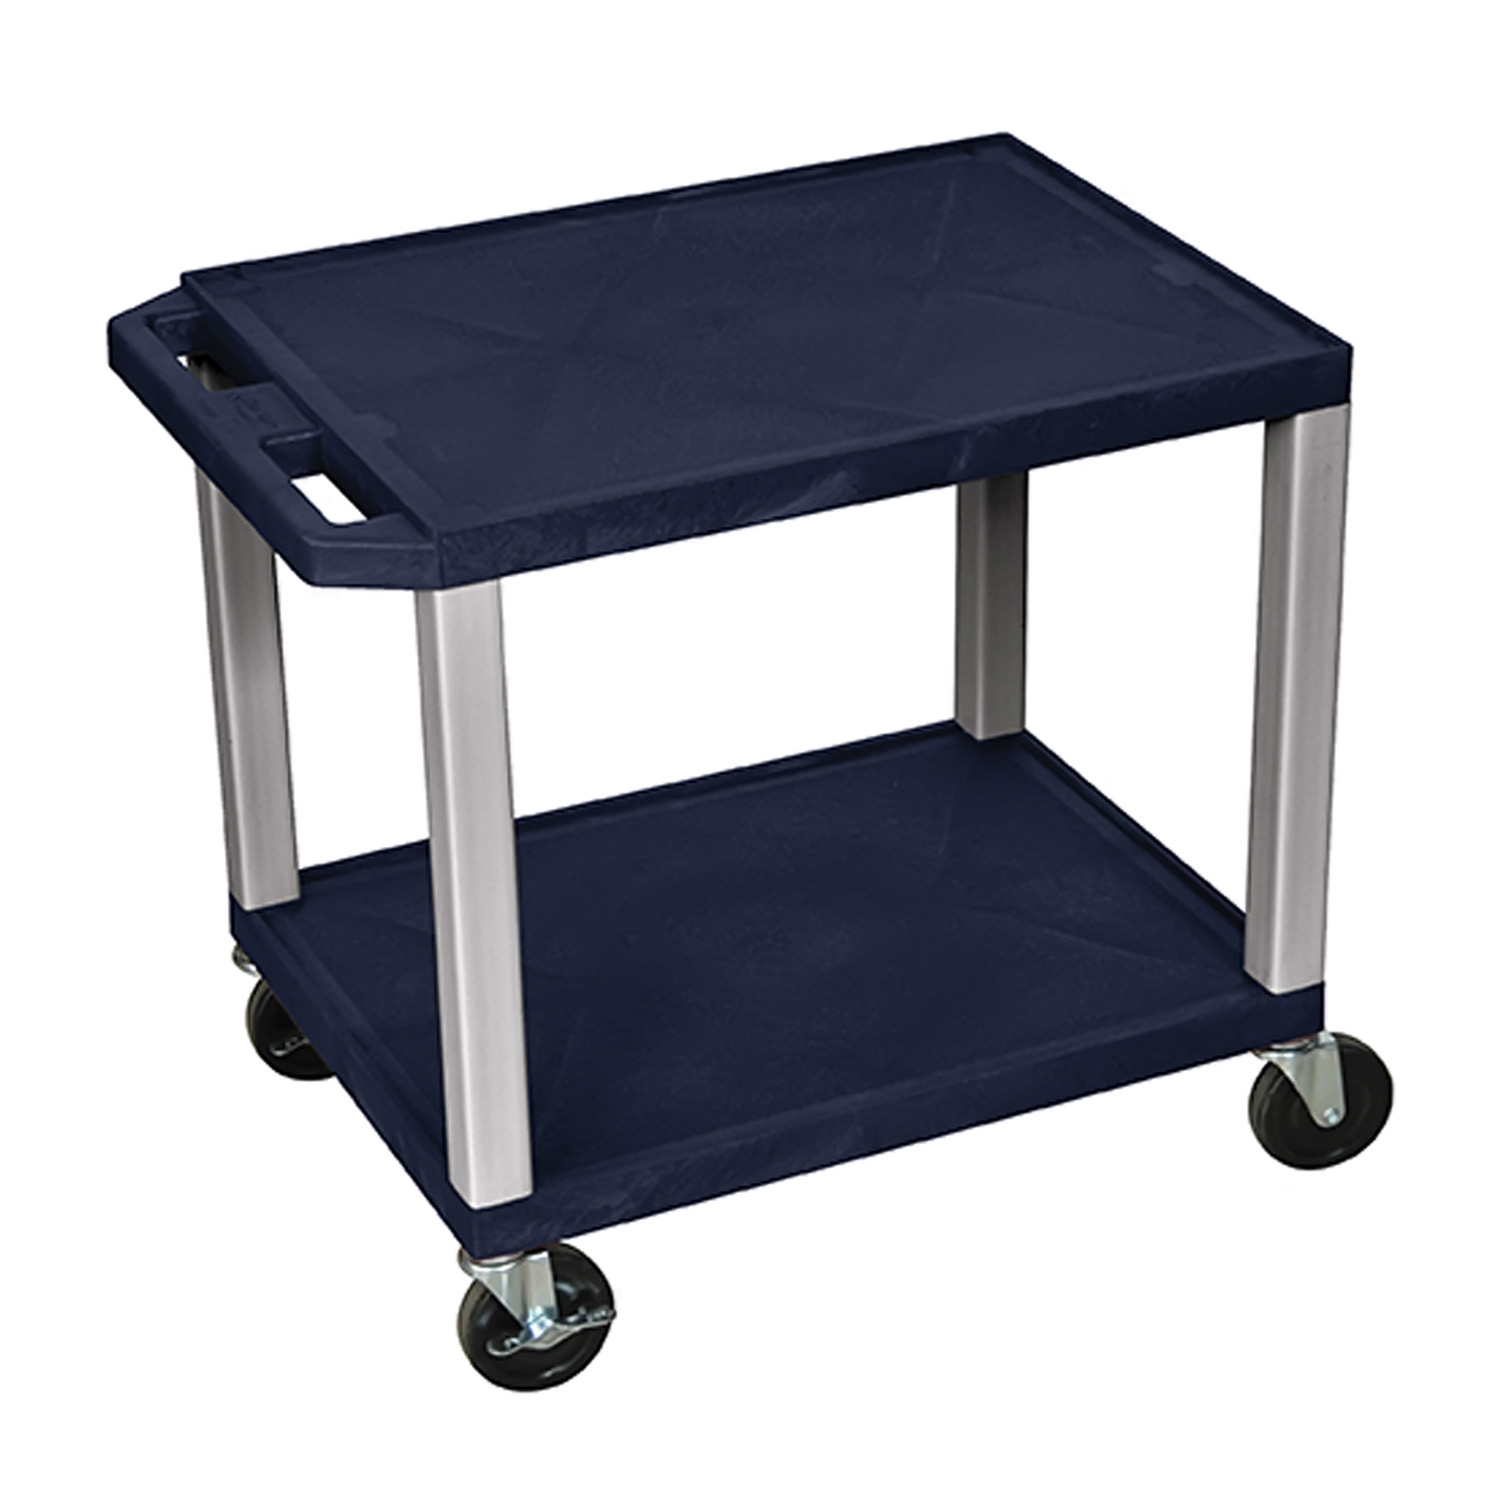 Luxor Offex Multipurpose Utility Cart No Electric Navy, Nickel - OFX-65319-LX